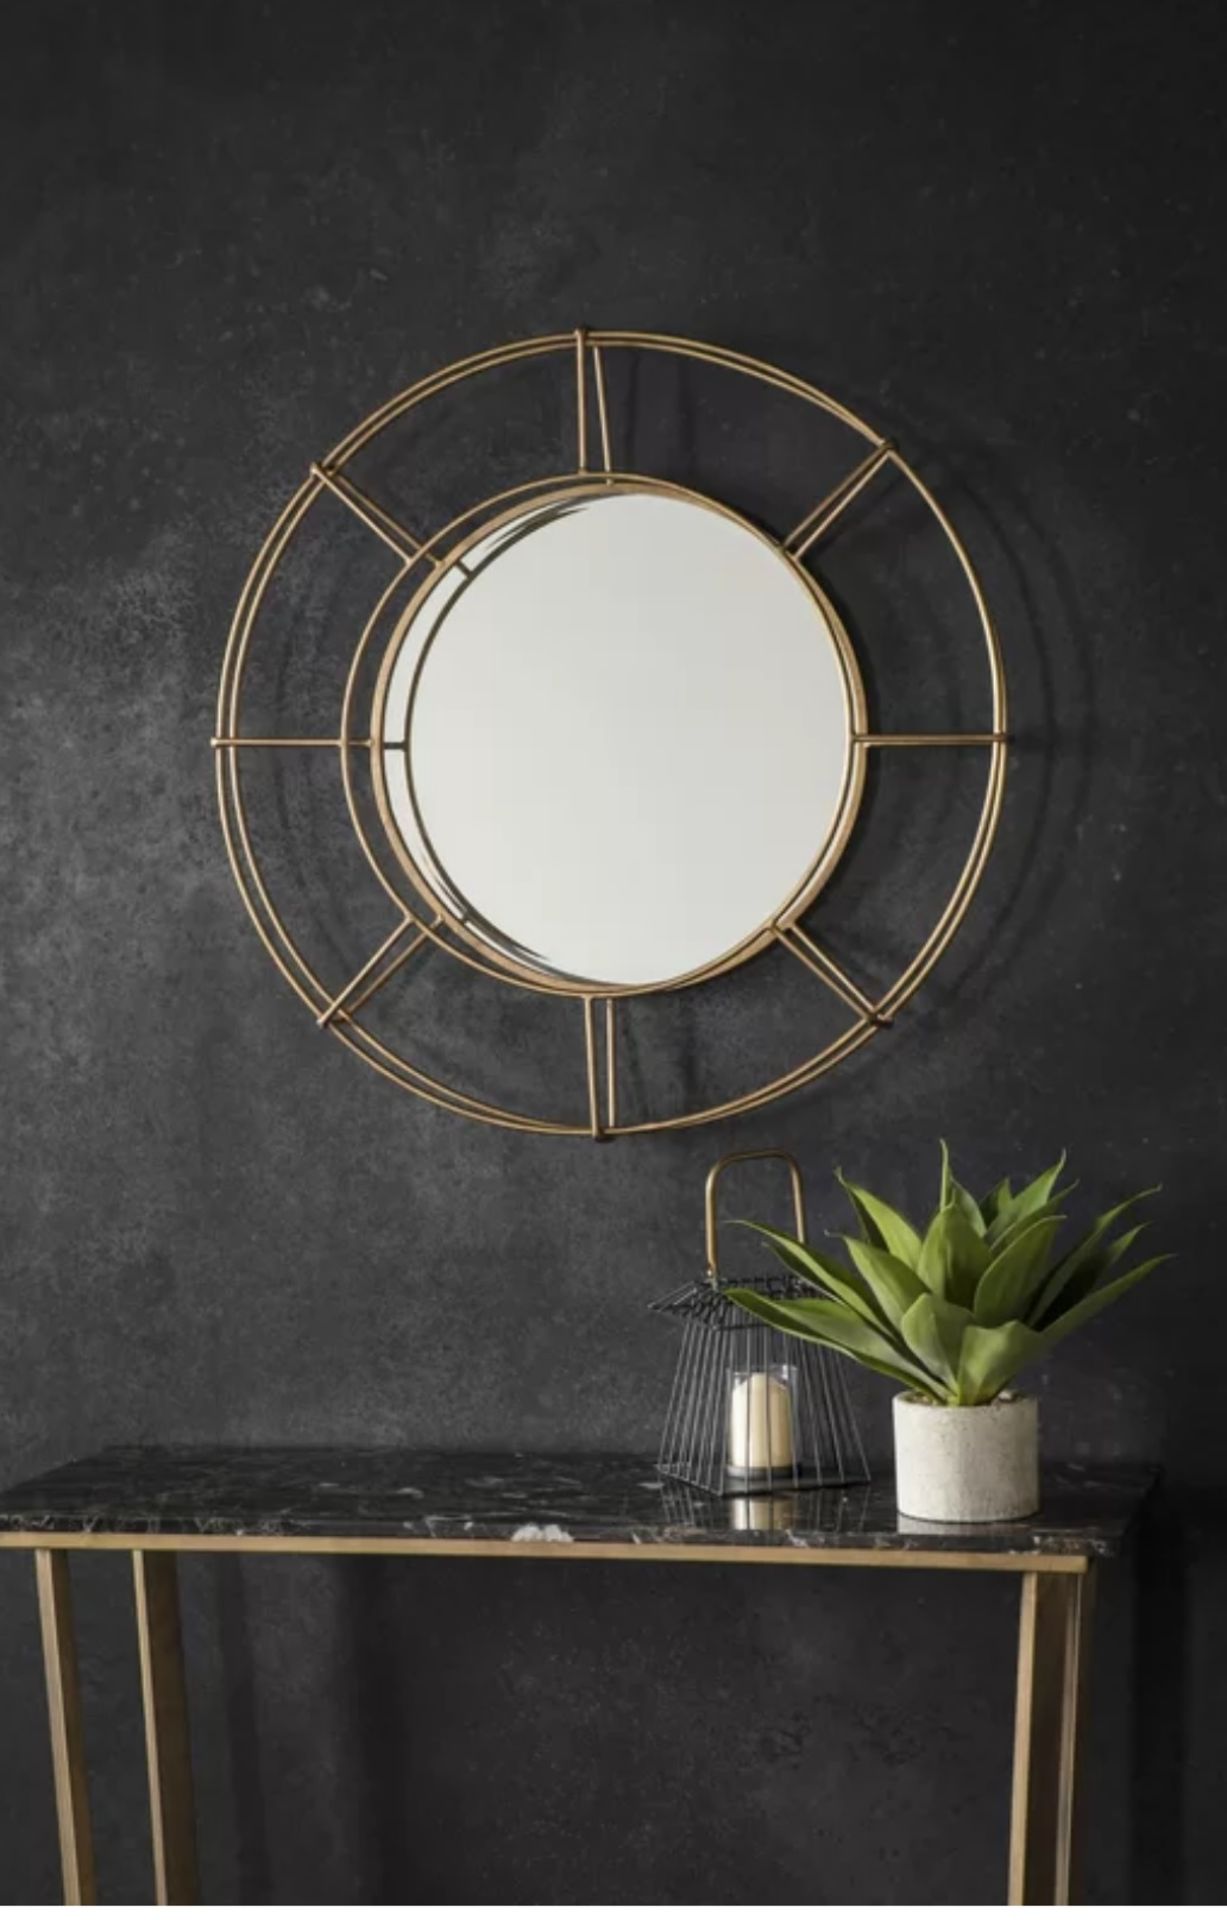 Thorne Mirror The Thorne Mirror Has A Beautiful Round Metal Frame In An Elegant Antique Gold Finish,